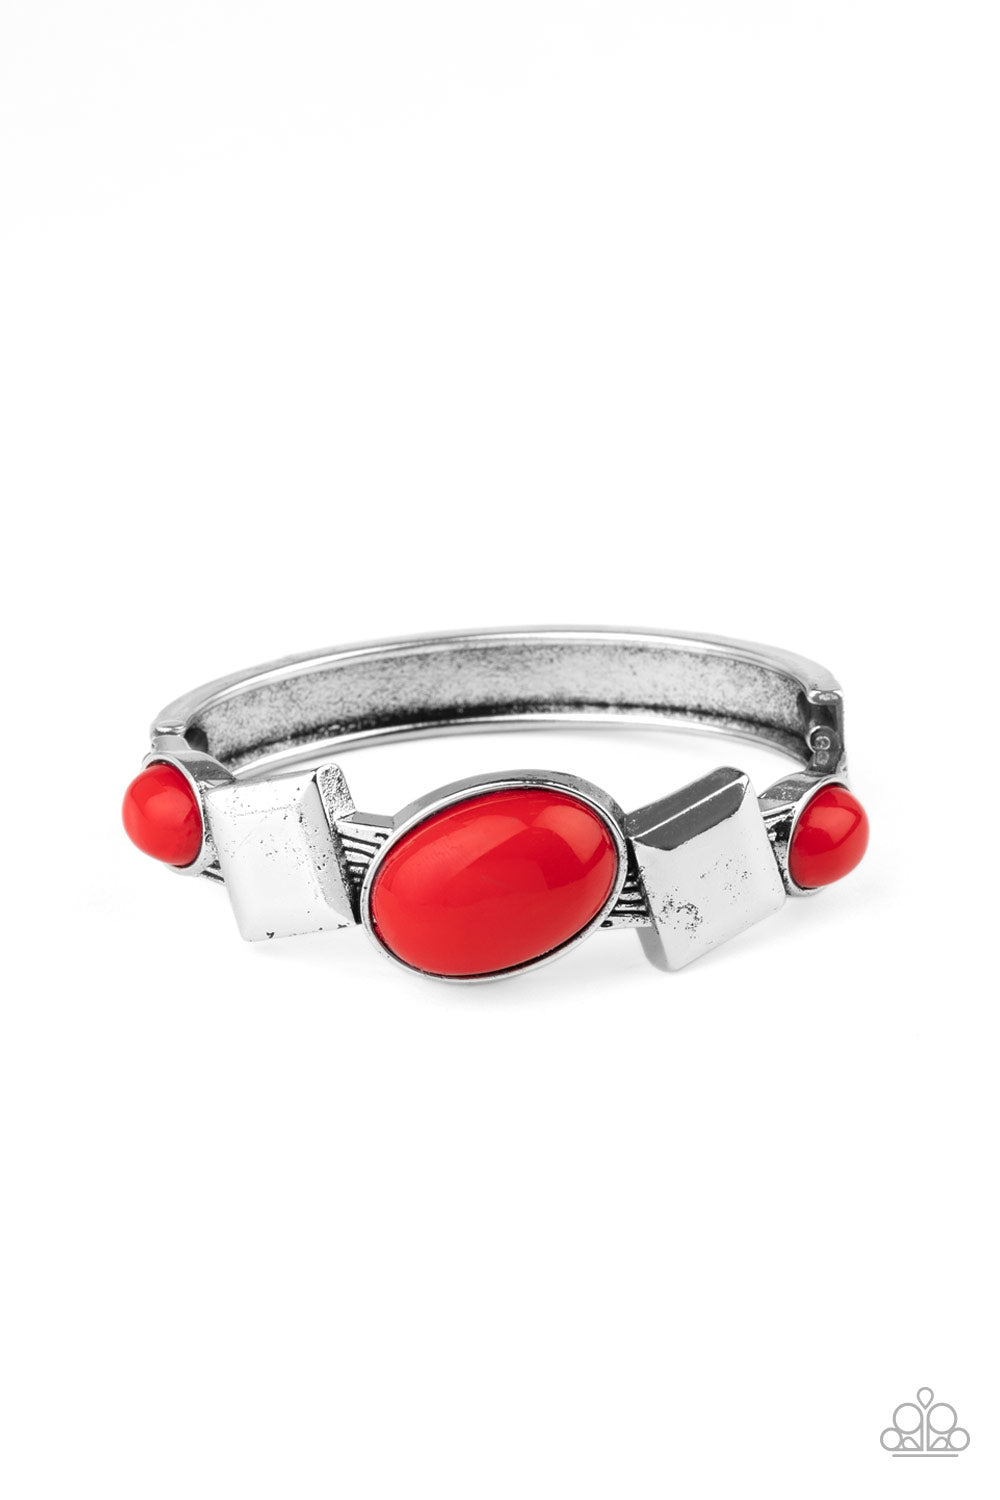 Paparazzi Accessories - Abstract Appeal - Red Bracelet - Alies Bling Bar